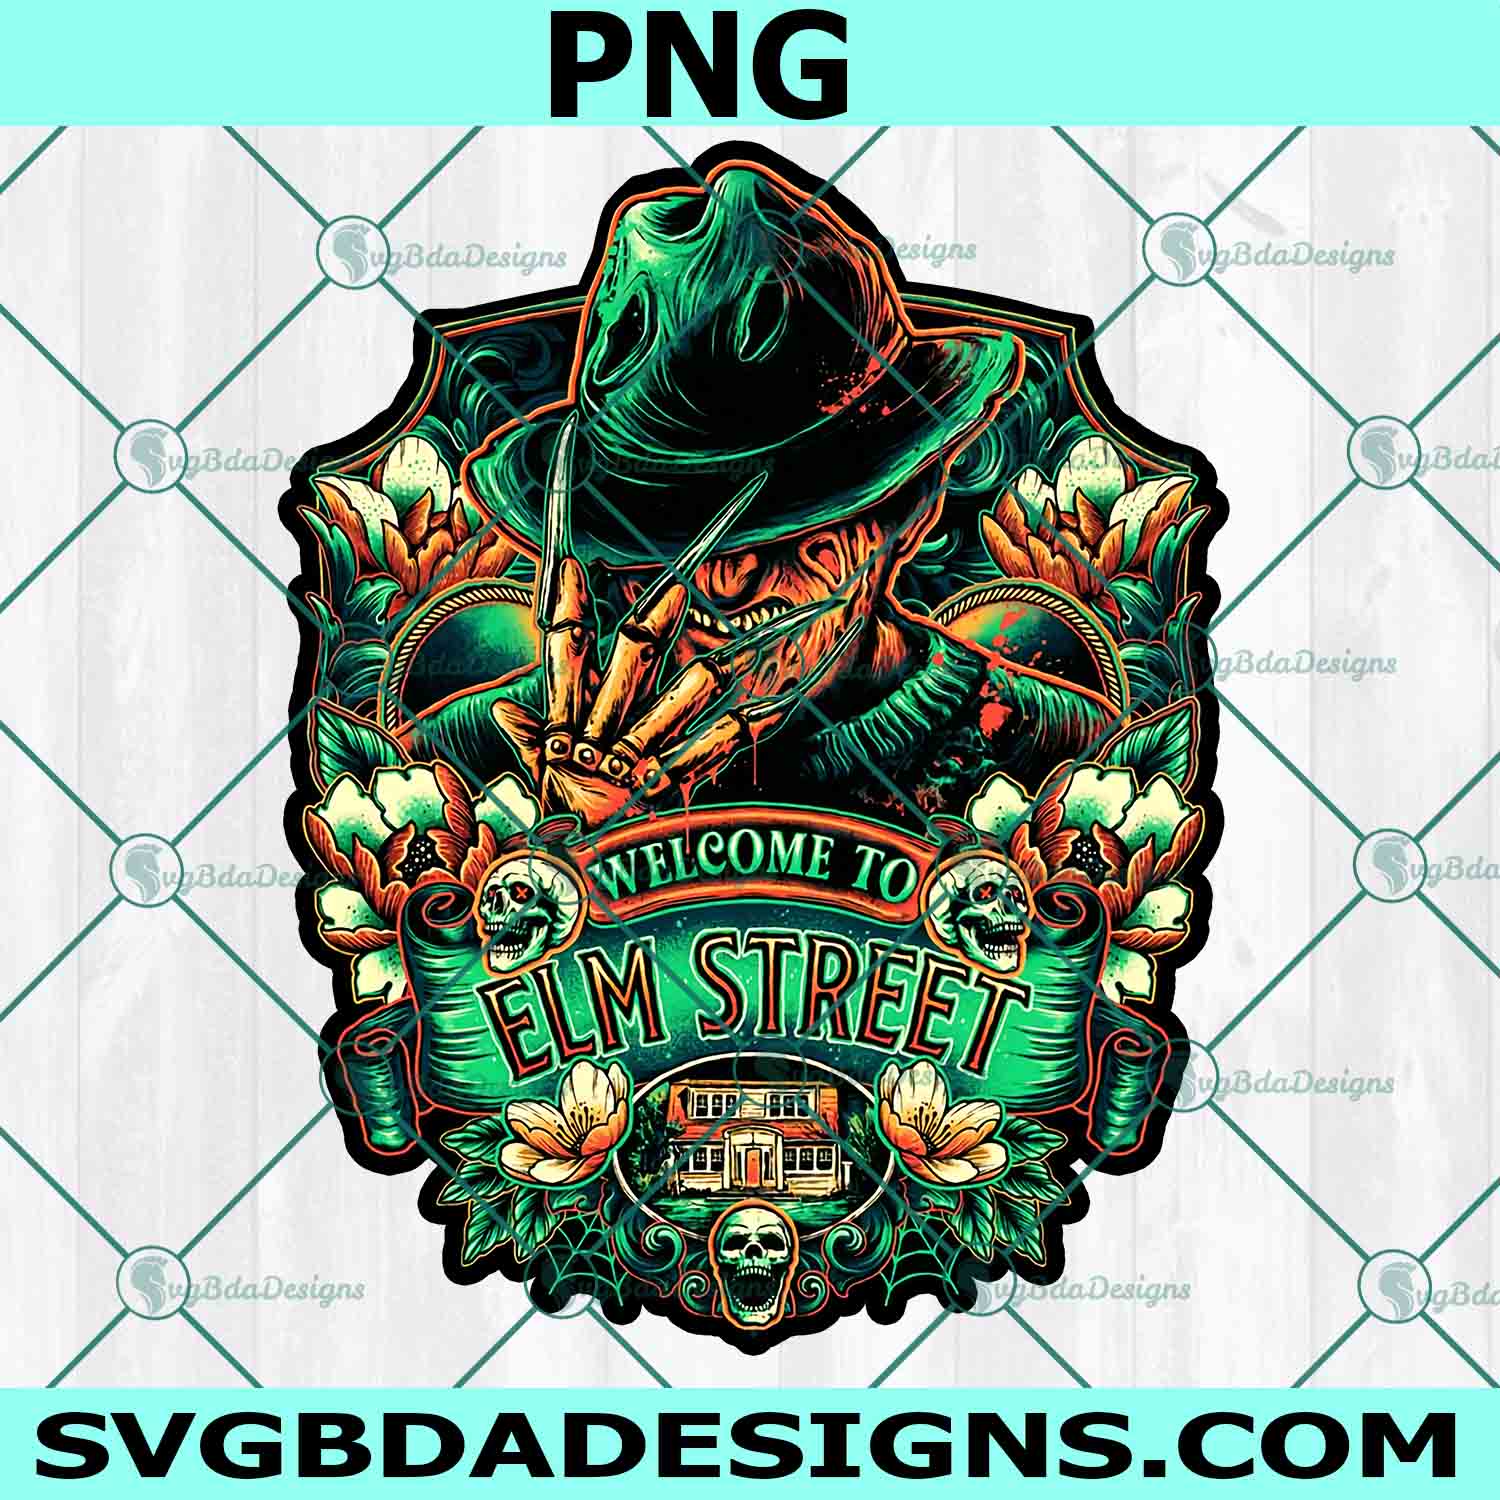 Welcome to Elm Street Png, Freddy Kruger Png, Nightmare on Elm Street Png, Horror Movies Png, Halloween Png, Horror Character Png, File For Cricut